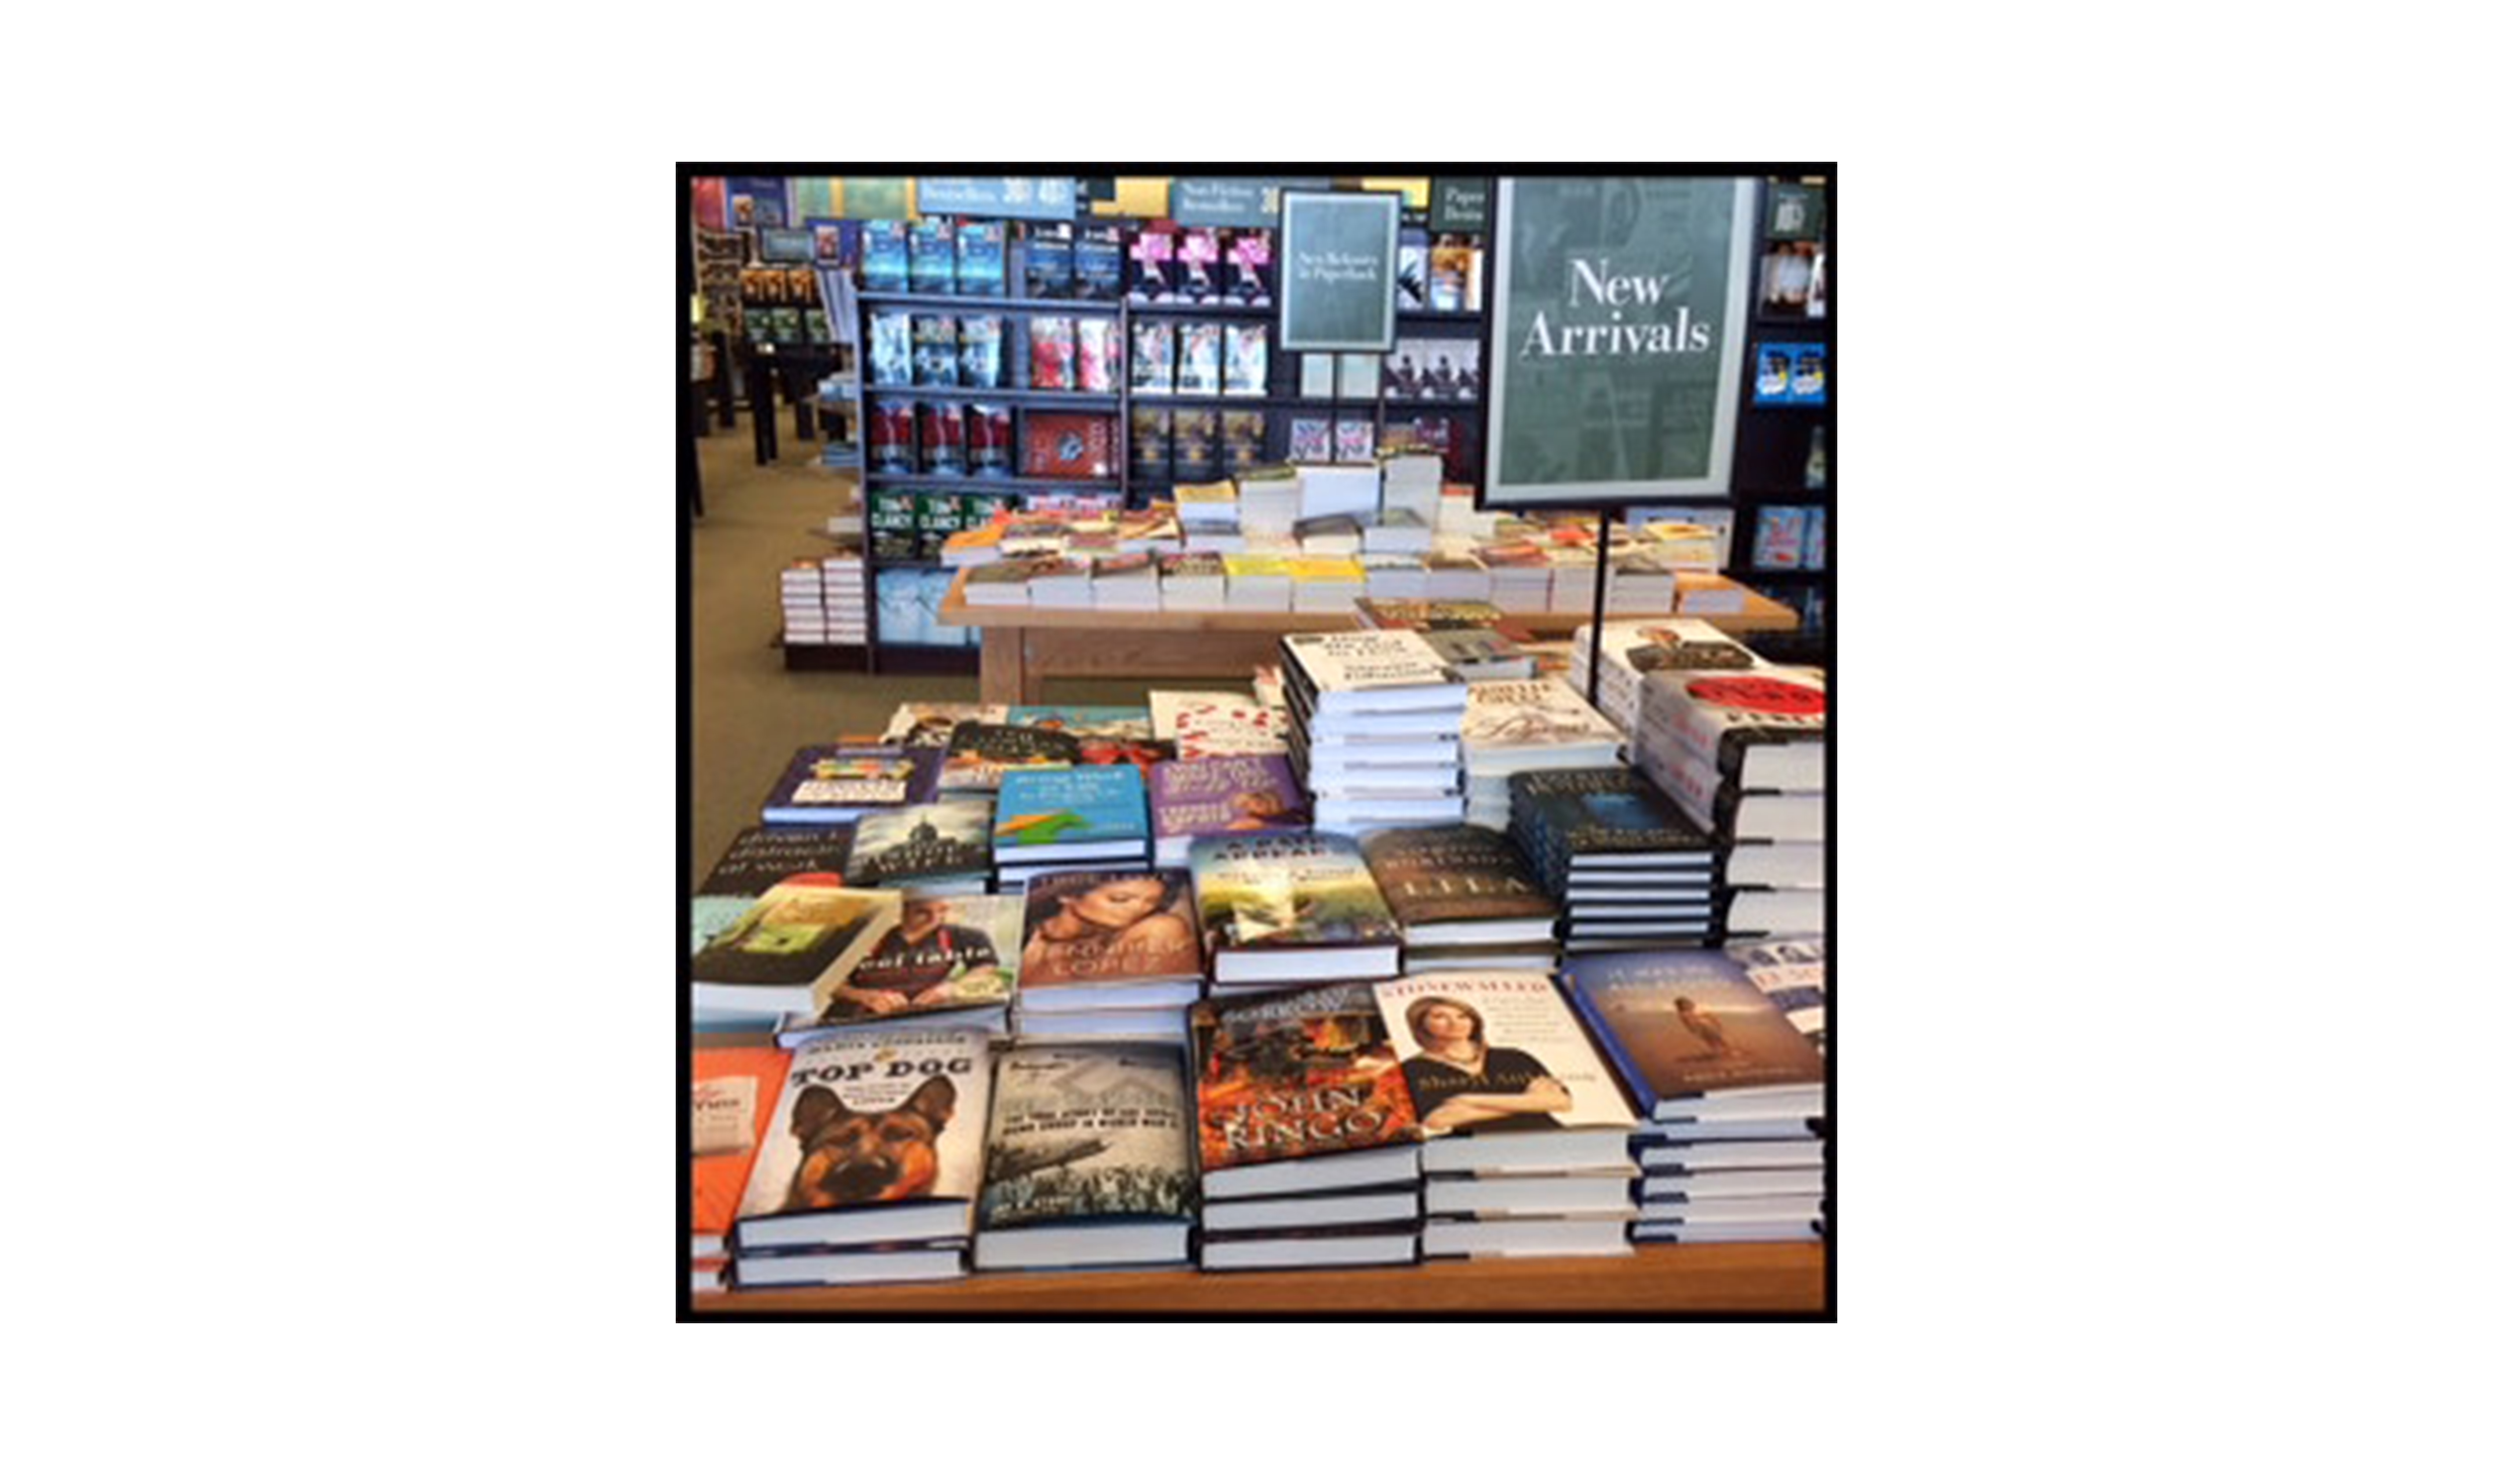 Bring Work to Life by Bringing Life to Work book on Barnes & Noble's New Arrivals table